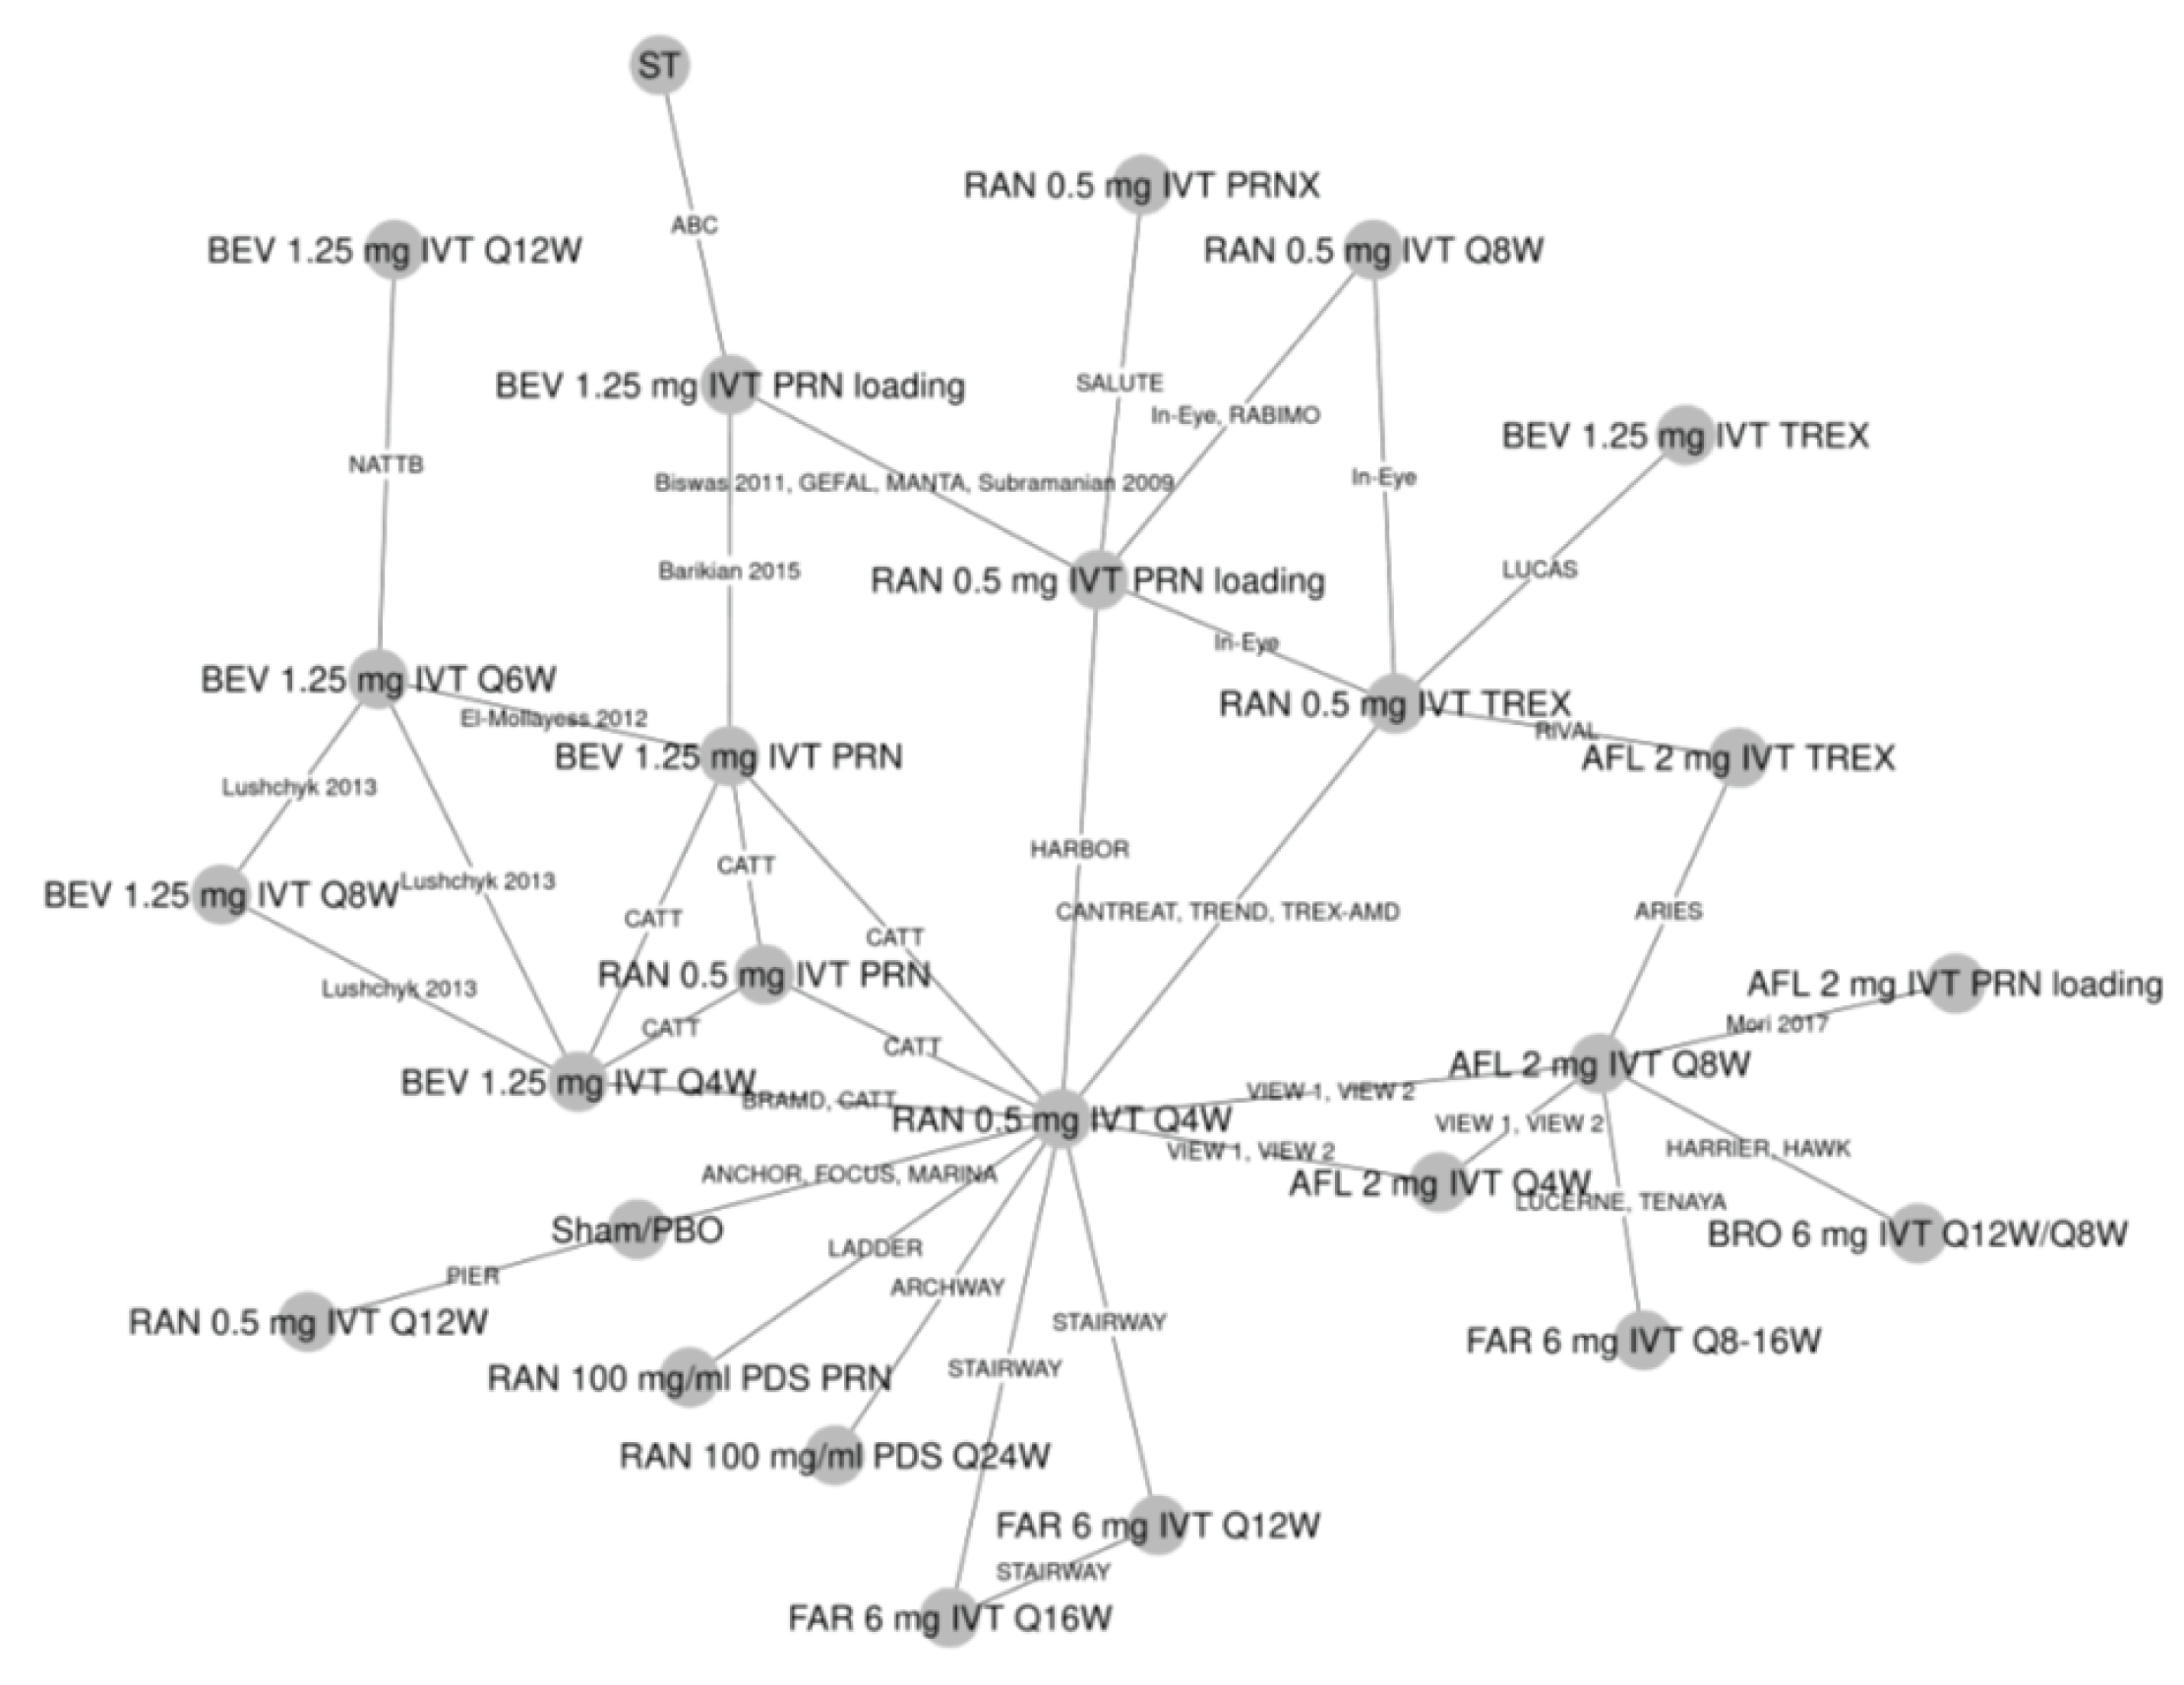 35 trials reported on the mean change in BCVA at 12 months and were connected in a network. There are several connected star diagrams with 5 or more connections: RAN 0.5 mg IVT every 4 weeks., AFL 2 mg IVT every 8 weeks., RAN 0.5 mg IVT TREX, BEV 1.25 mg IVT PRN and RAN 0.5 mg IVT PRN loading. The most common connection was ranibizumab 0.5 mg IVT every 4 weeks. Faricimab was connected to aflibercept through the TENAYA and LUCERNE trials and connected to ranibizumab 0.5 mg IVT every 4 weeks. through the STAIRWAY trial.